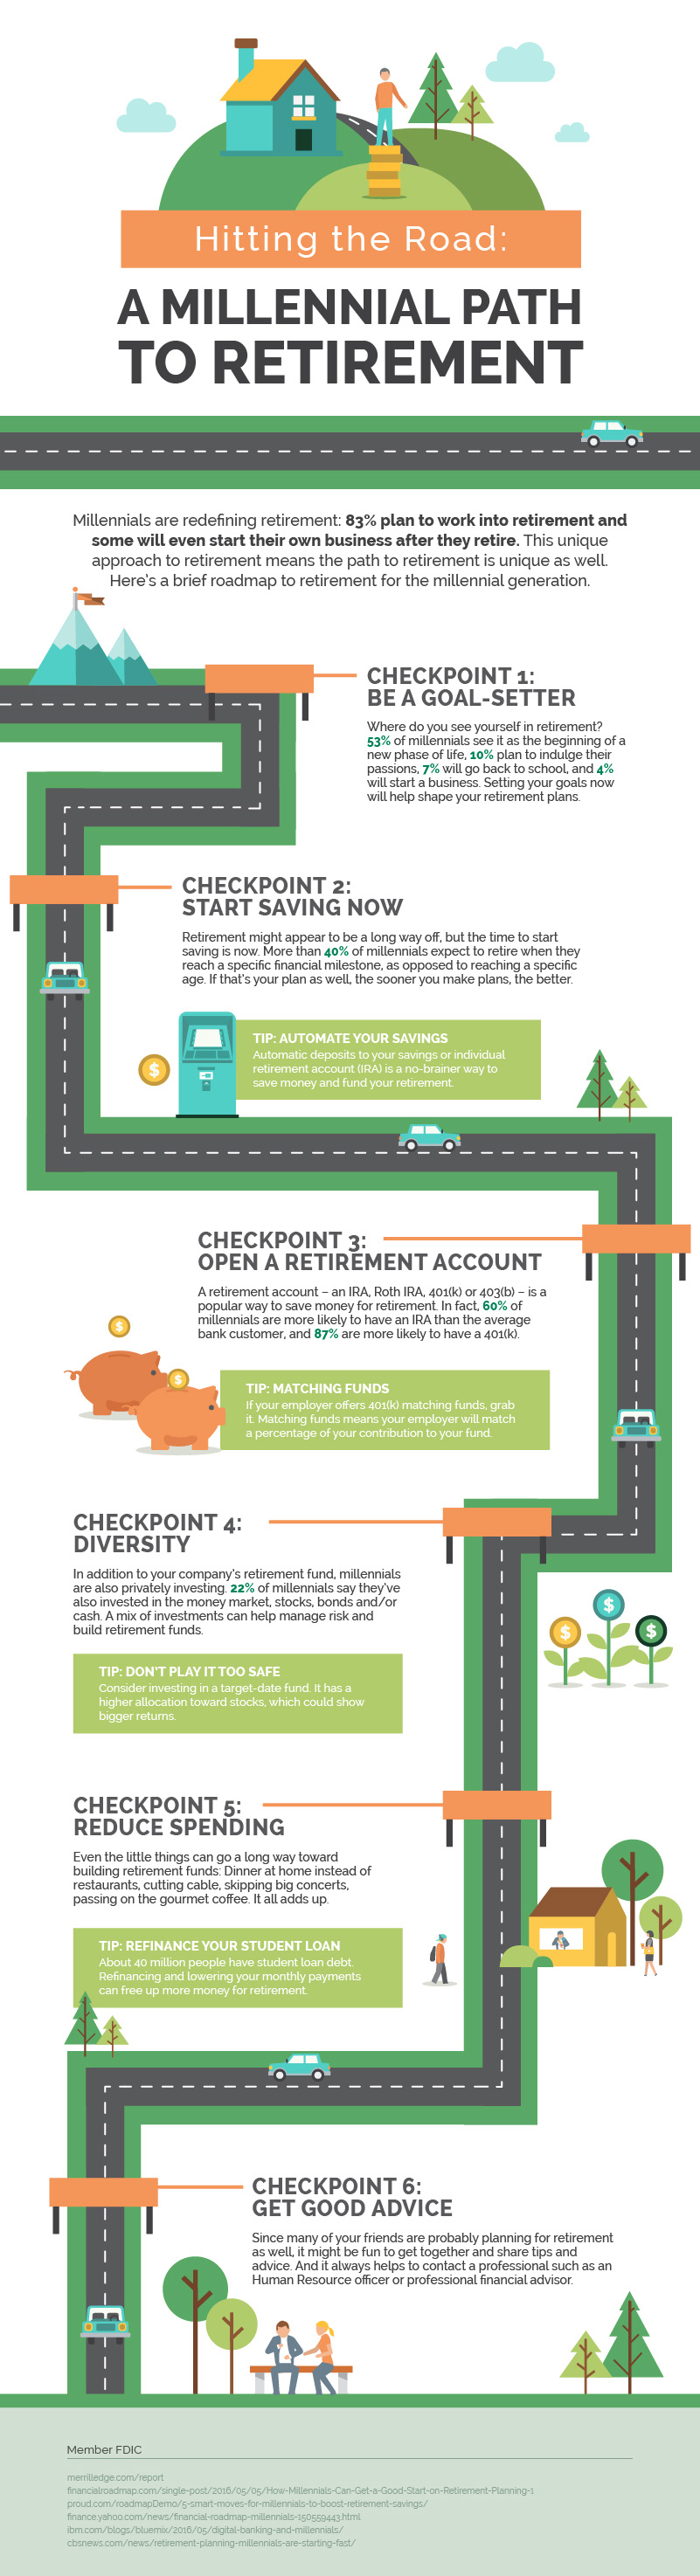 An infographic outlining 6 checkpoints in a millennial path to retirement